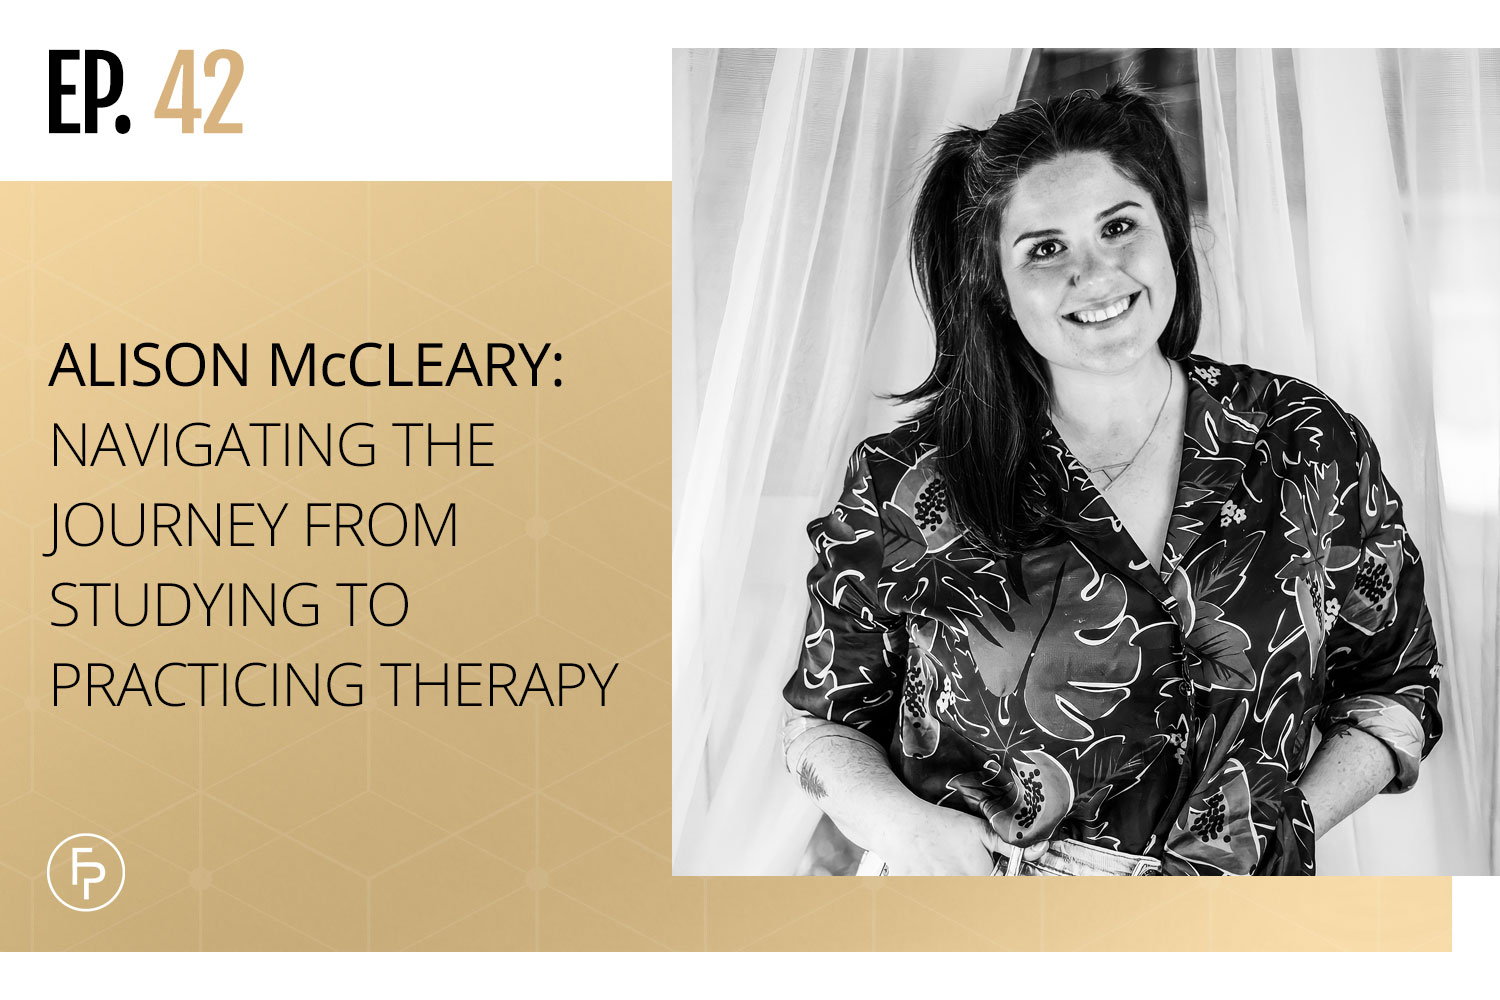 Alison McCleary: Navigating the Journey From Studying to Practicing Therapy| Ep 42